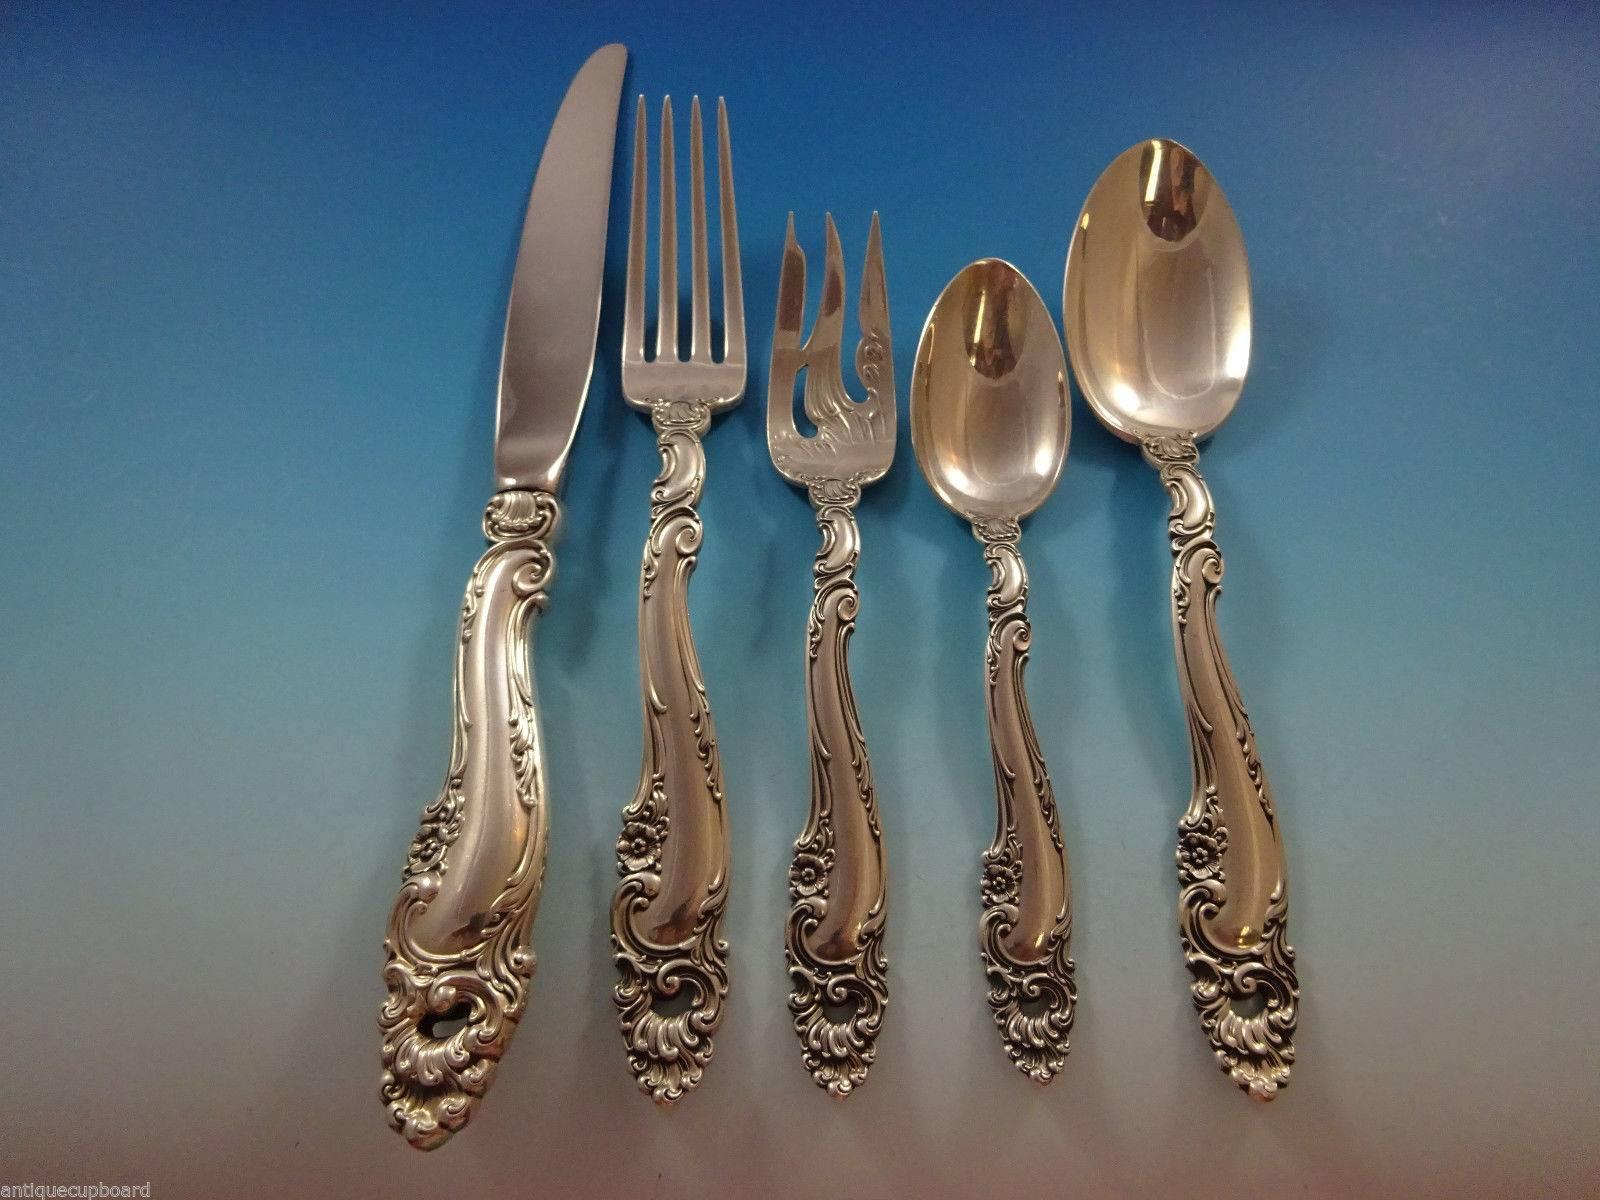 Monumental dinner size decor by Gorham sterling silver Flatware set - 141 Pieces. This pattern is heavy and features rococo swirls, shells, and small flowers. This set includes: 
12 dinner knives, 9 5/8